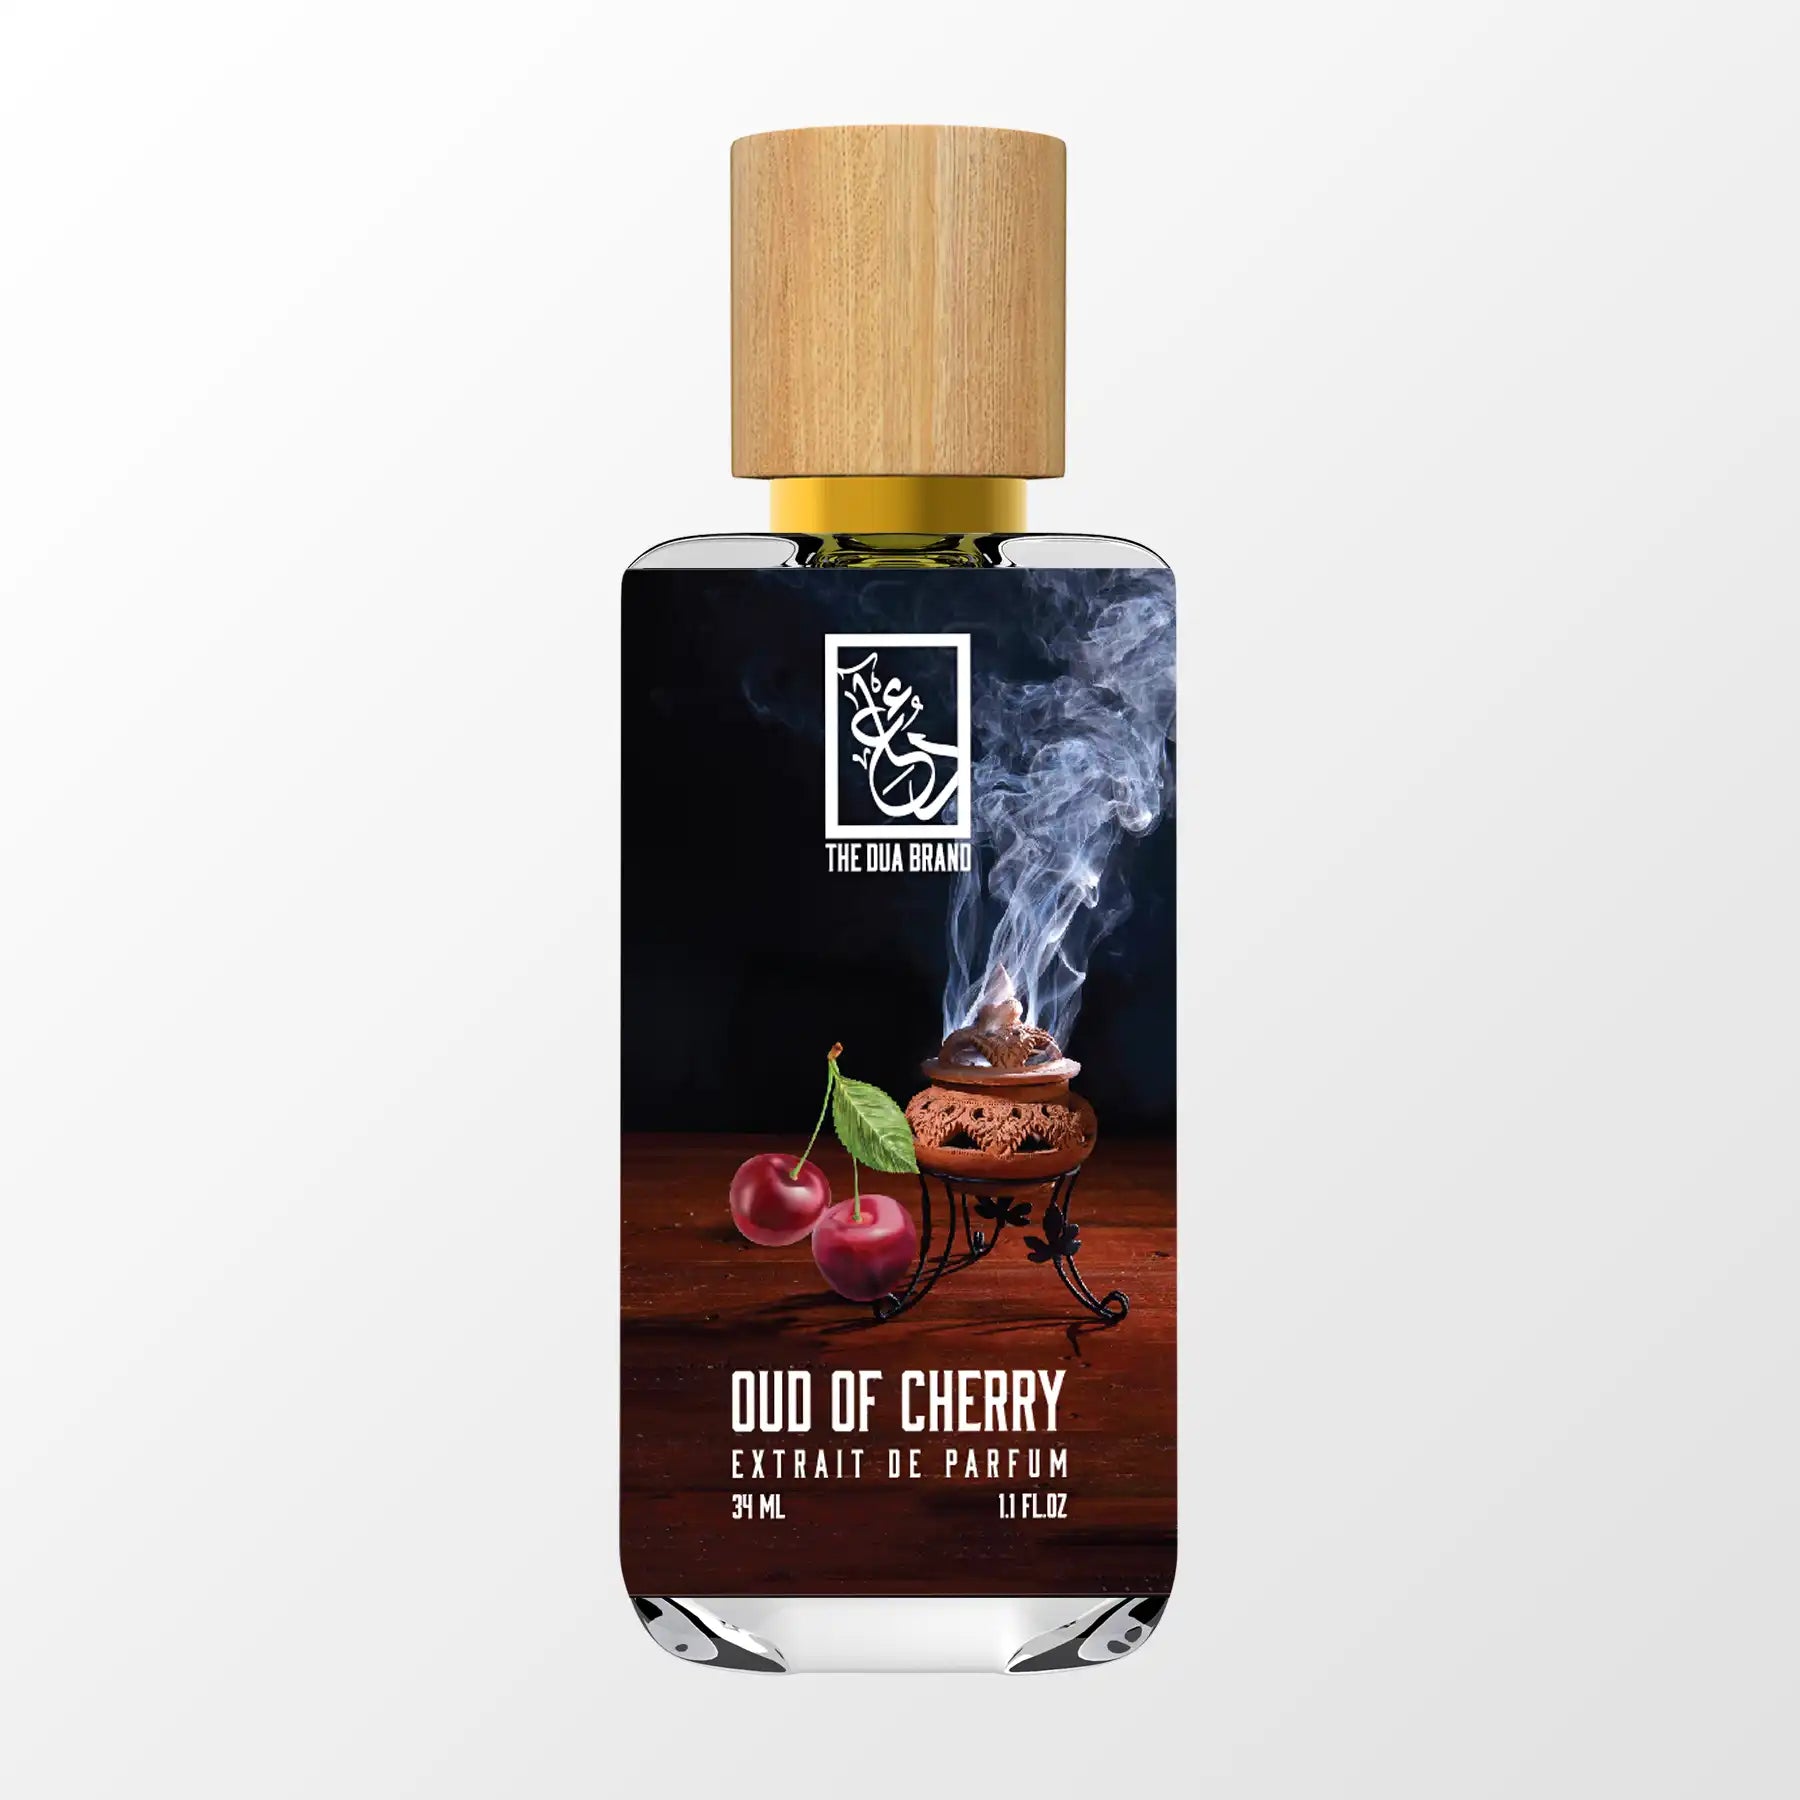 oud-of-cherry-front